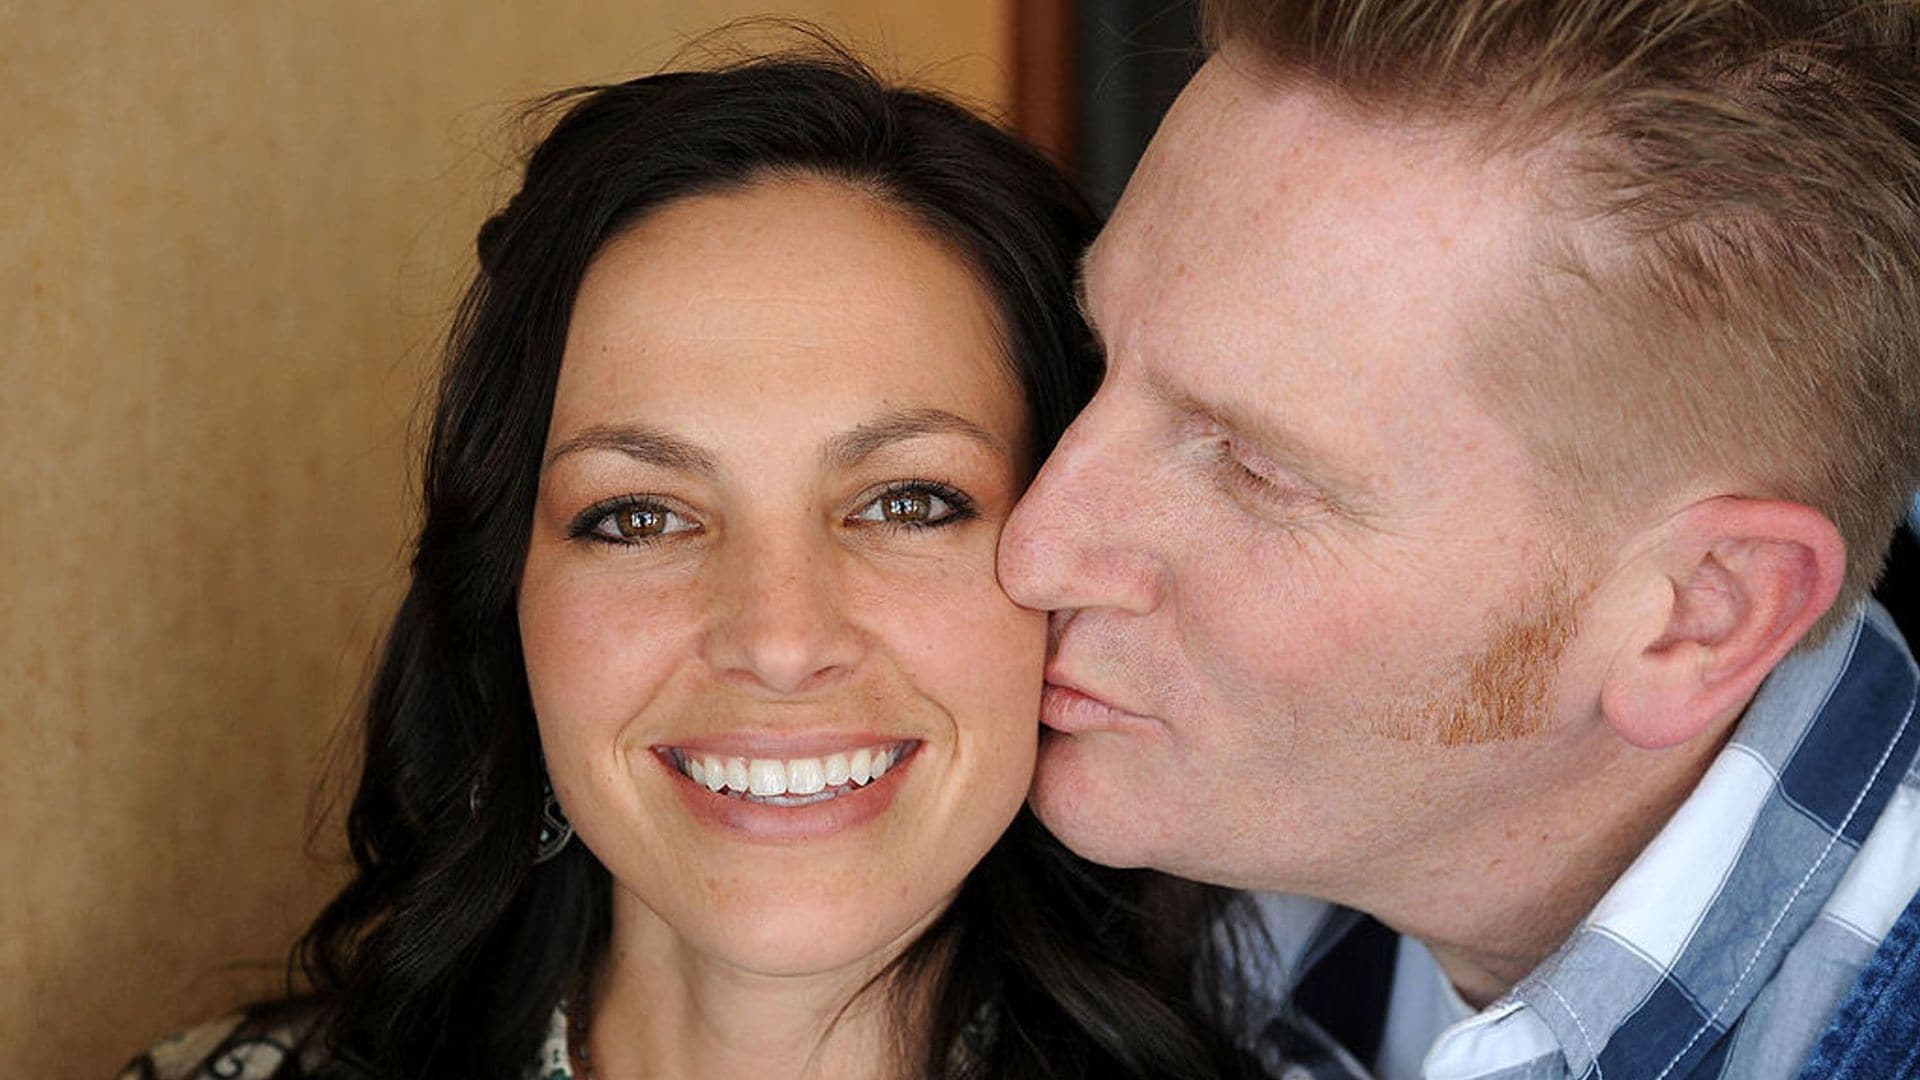 Joey Feek shares 'one last kiss' with daughter and says goodbye